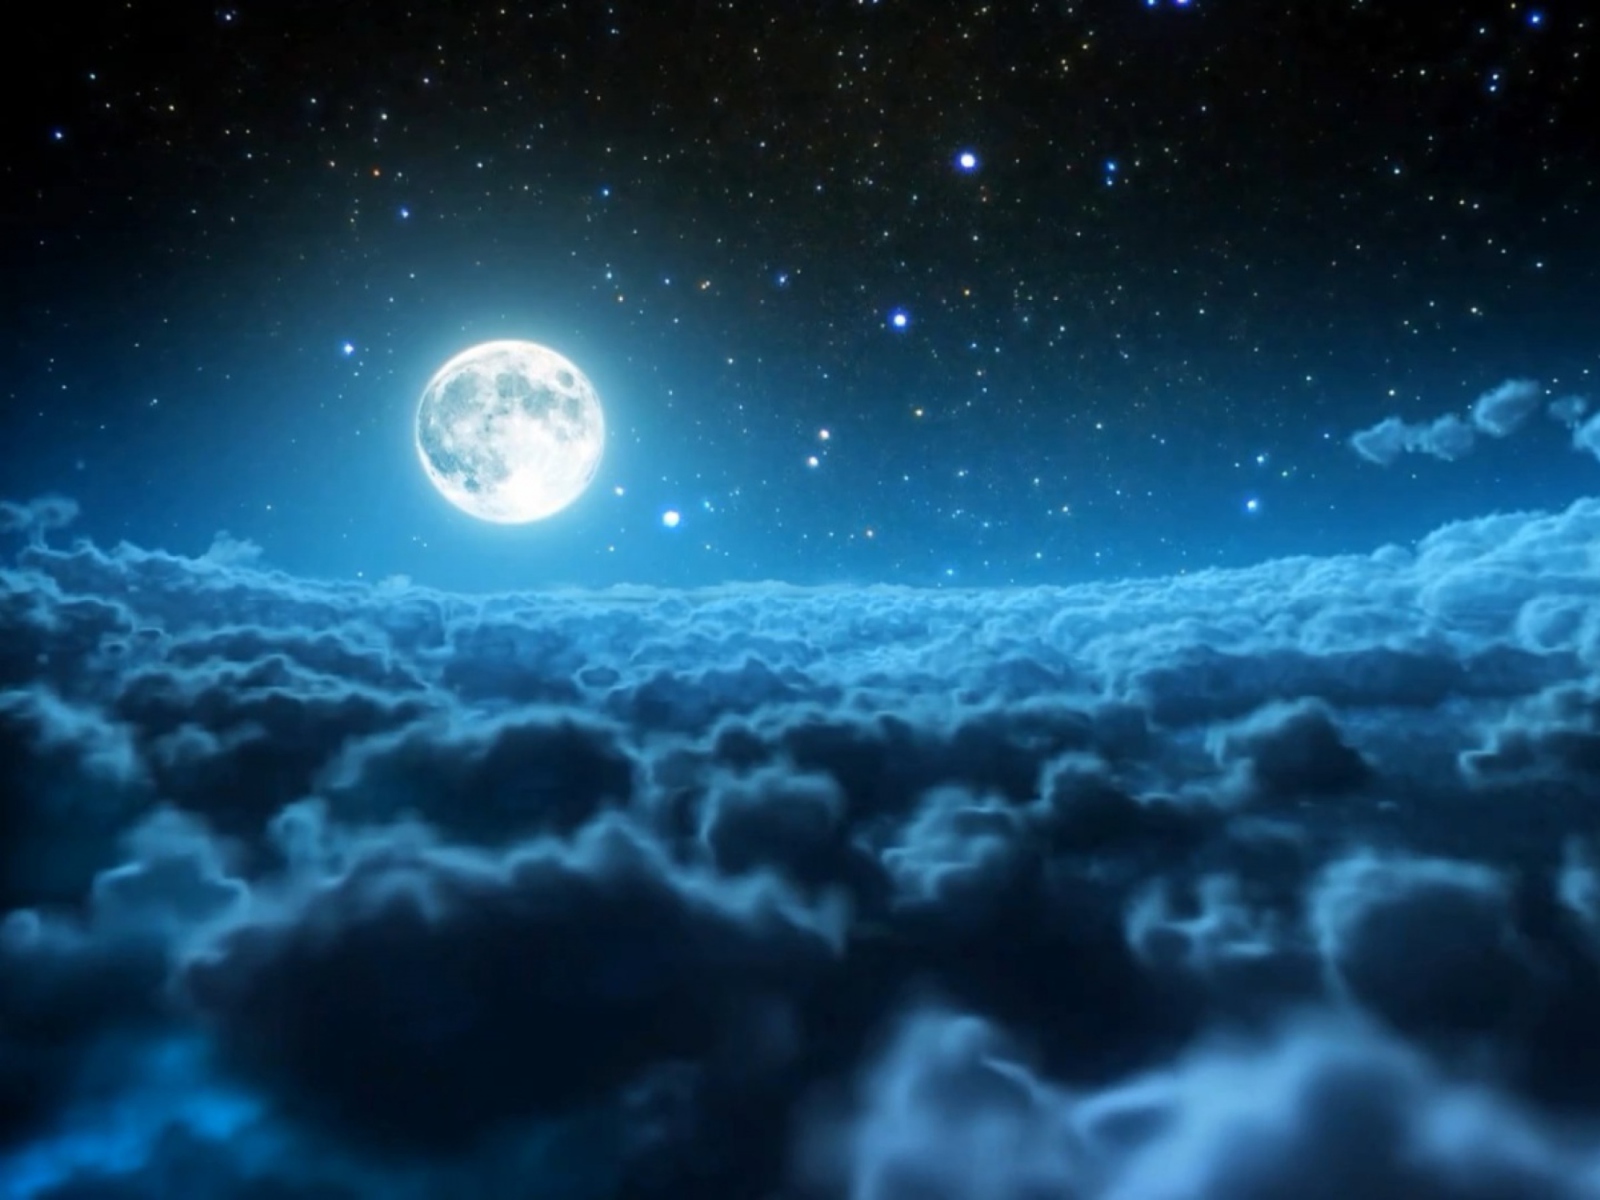 Cloudy Night And Sparkling Moon wallpaper 1600x1200